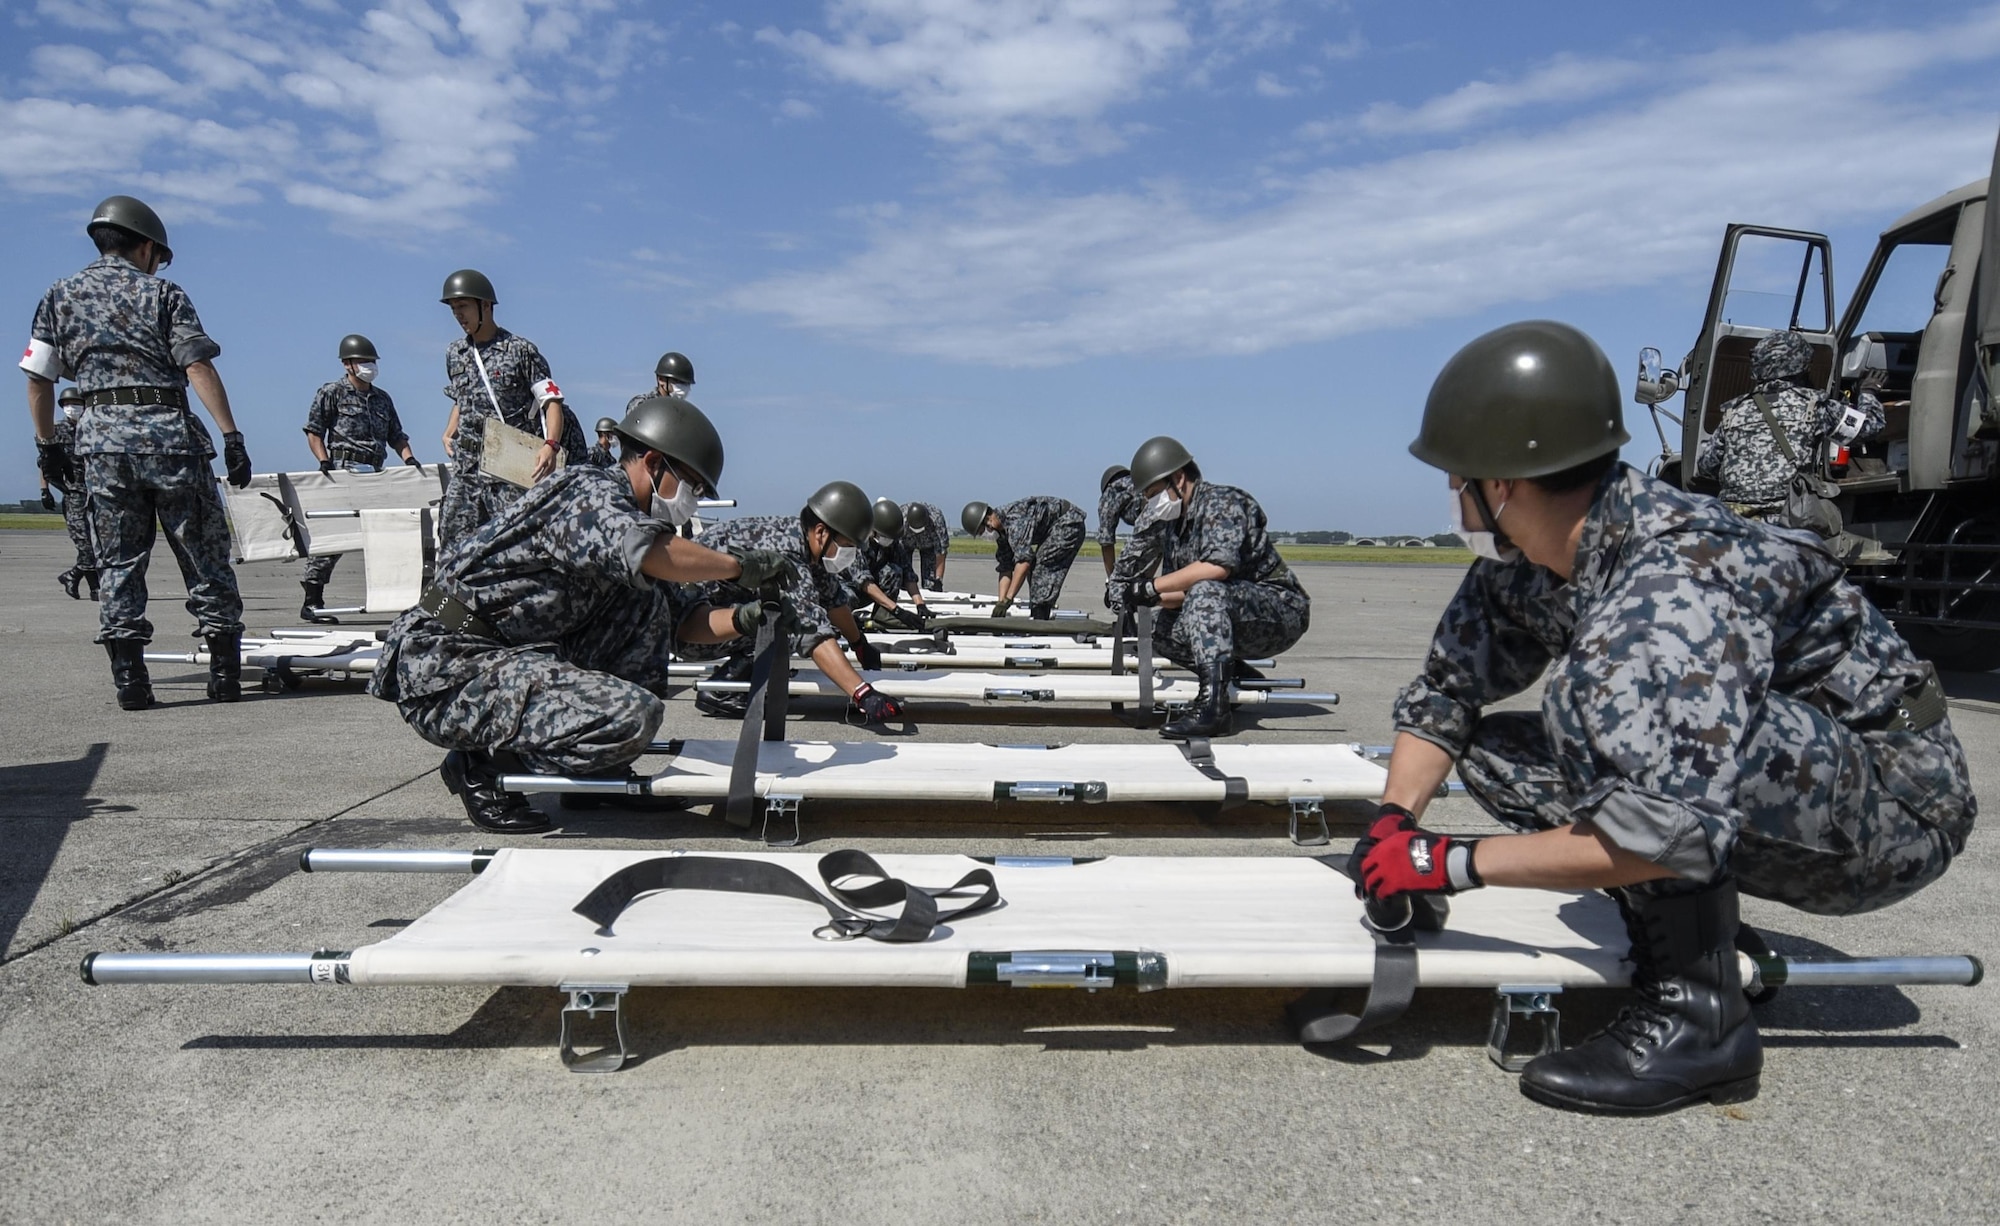 Japan Air Self Defense Force personnel prepare litters during a bilateral emergency management exercise at Aug. 31, 2016. USAF and JASDF agencies including security forces squadrons, medical and fire departments responded to approximately 60 USAF and Japanese personnel who simulated various injuries that could occur after an explosion. (U.S. Air Force photo by Airman 1st Class Sadie Colbert)